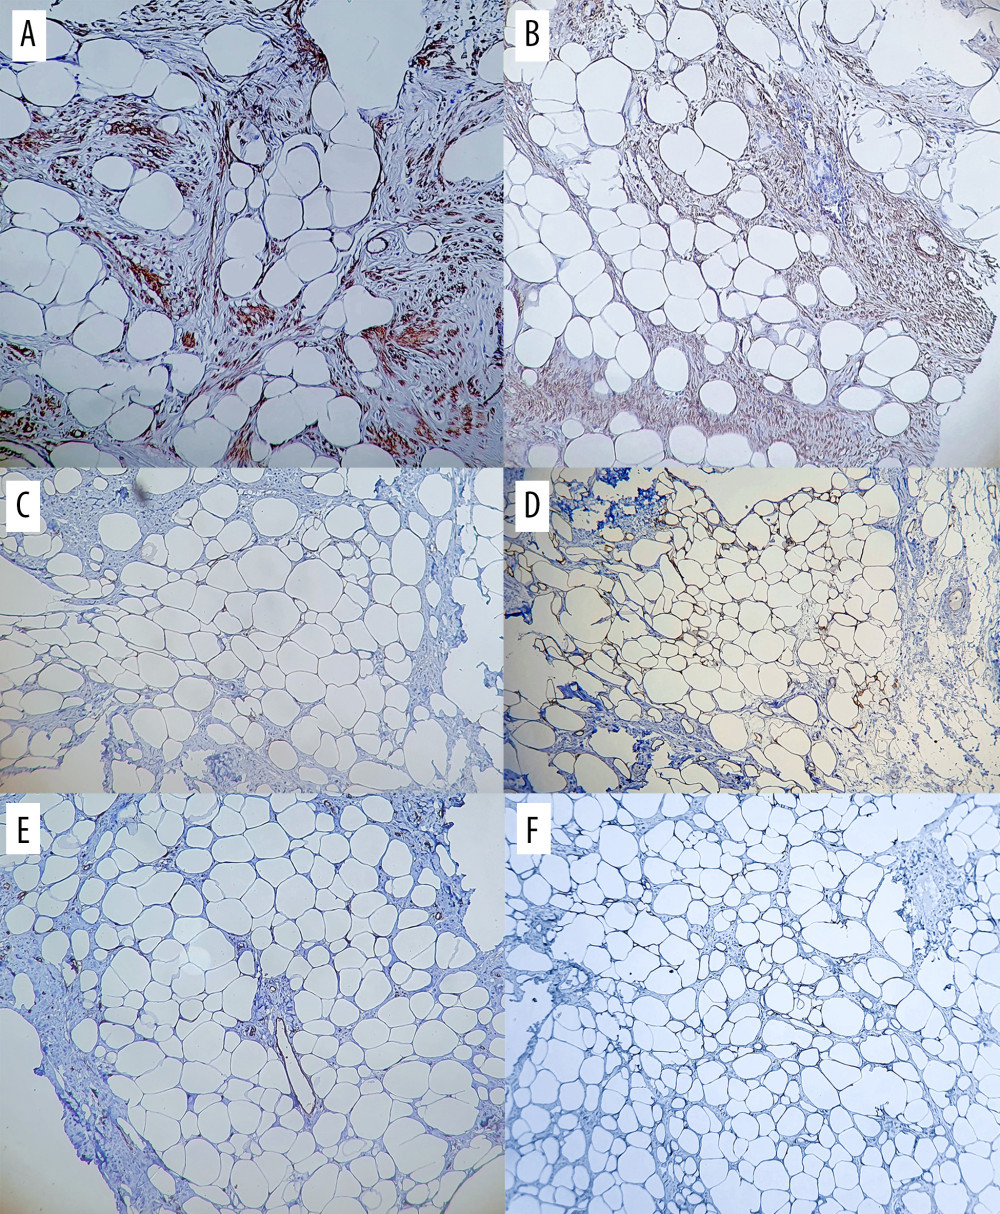 Immunohistochemical features of lipoleiomyoma. (A) Diffuse, moderately positive, cytoplasmic reaction of h-caldesmon in smooth muscle fibers (IHC stain, Ob ×200). (B) Diffuse, moderately positive, cytoplasmic reaction of desmin in smooth muscle fibers (IHC stain, Ob ×200). (C) Diffuse, moderately positive reaction for S100 in the membrane of fat cells (IHC stain, Ob ×200). (D) Diffuse, moderately positive reaction for calretinin in the nuclei of fat cells (IHC stain, Ob ×200). (E) Negative reaction for CD34 in the tumor (IHC stain, Ob ×200). (F) Negative reaction for MDM2 in the lipoleiomyoma (IHC stain, Ob ×200).